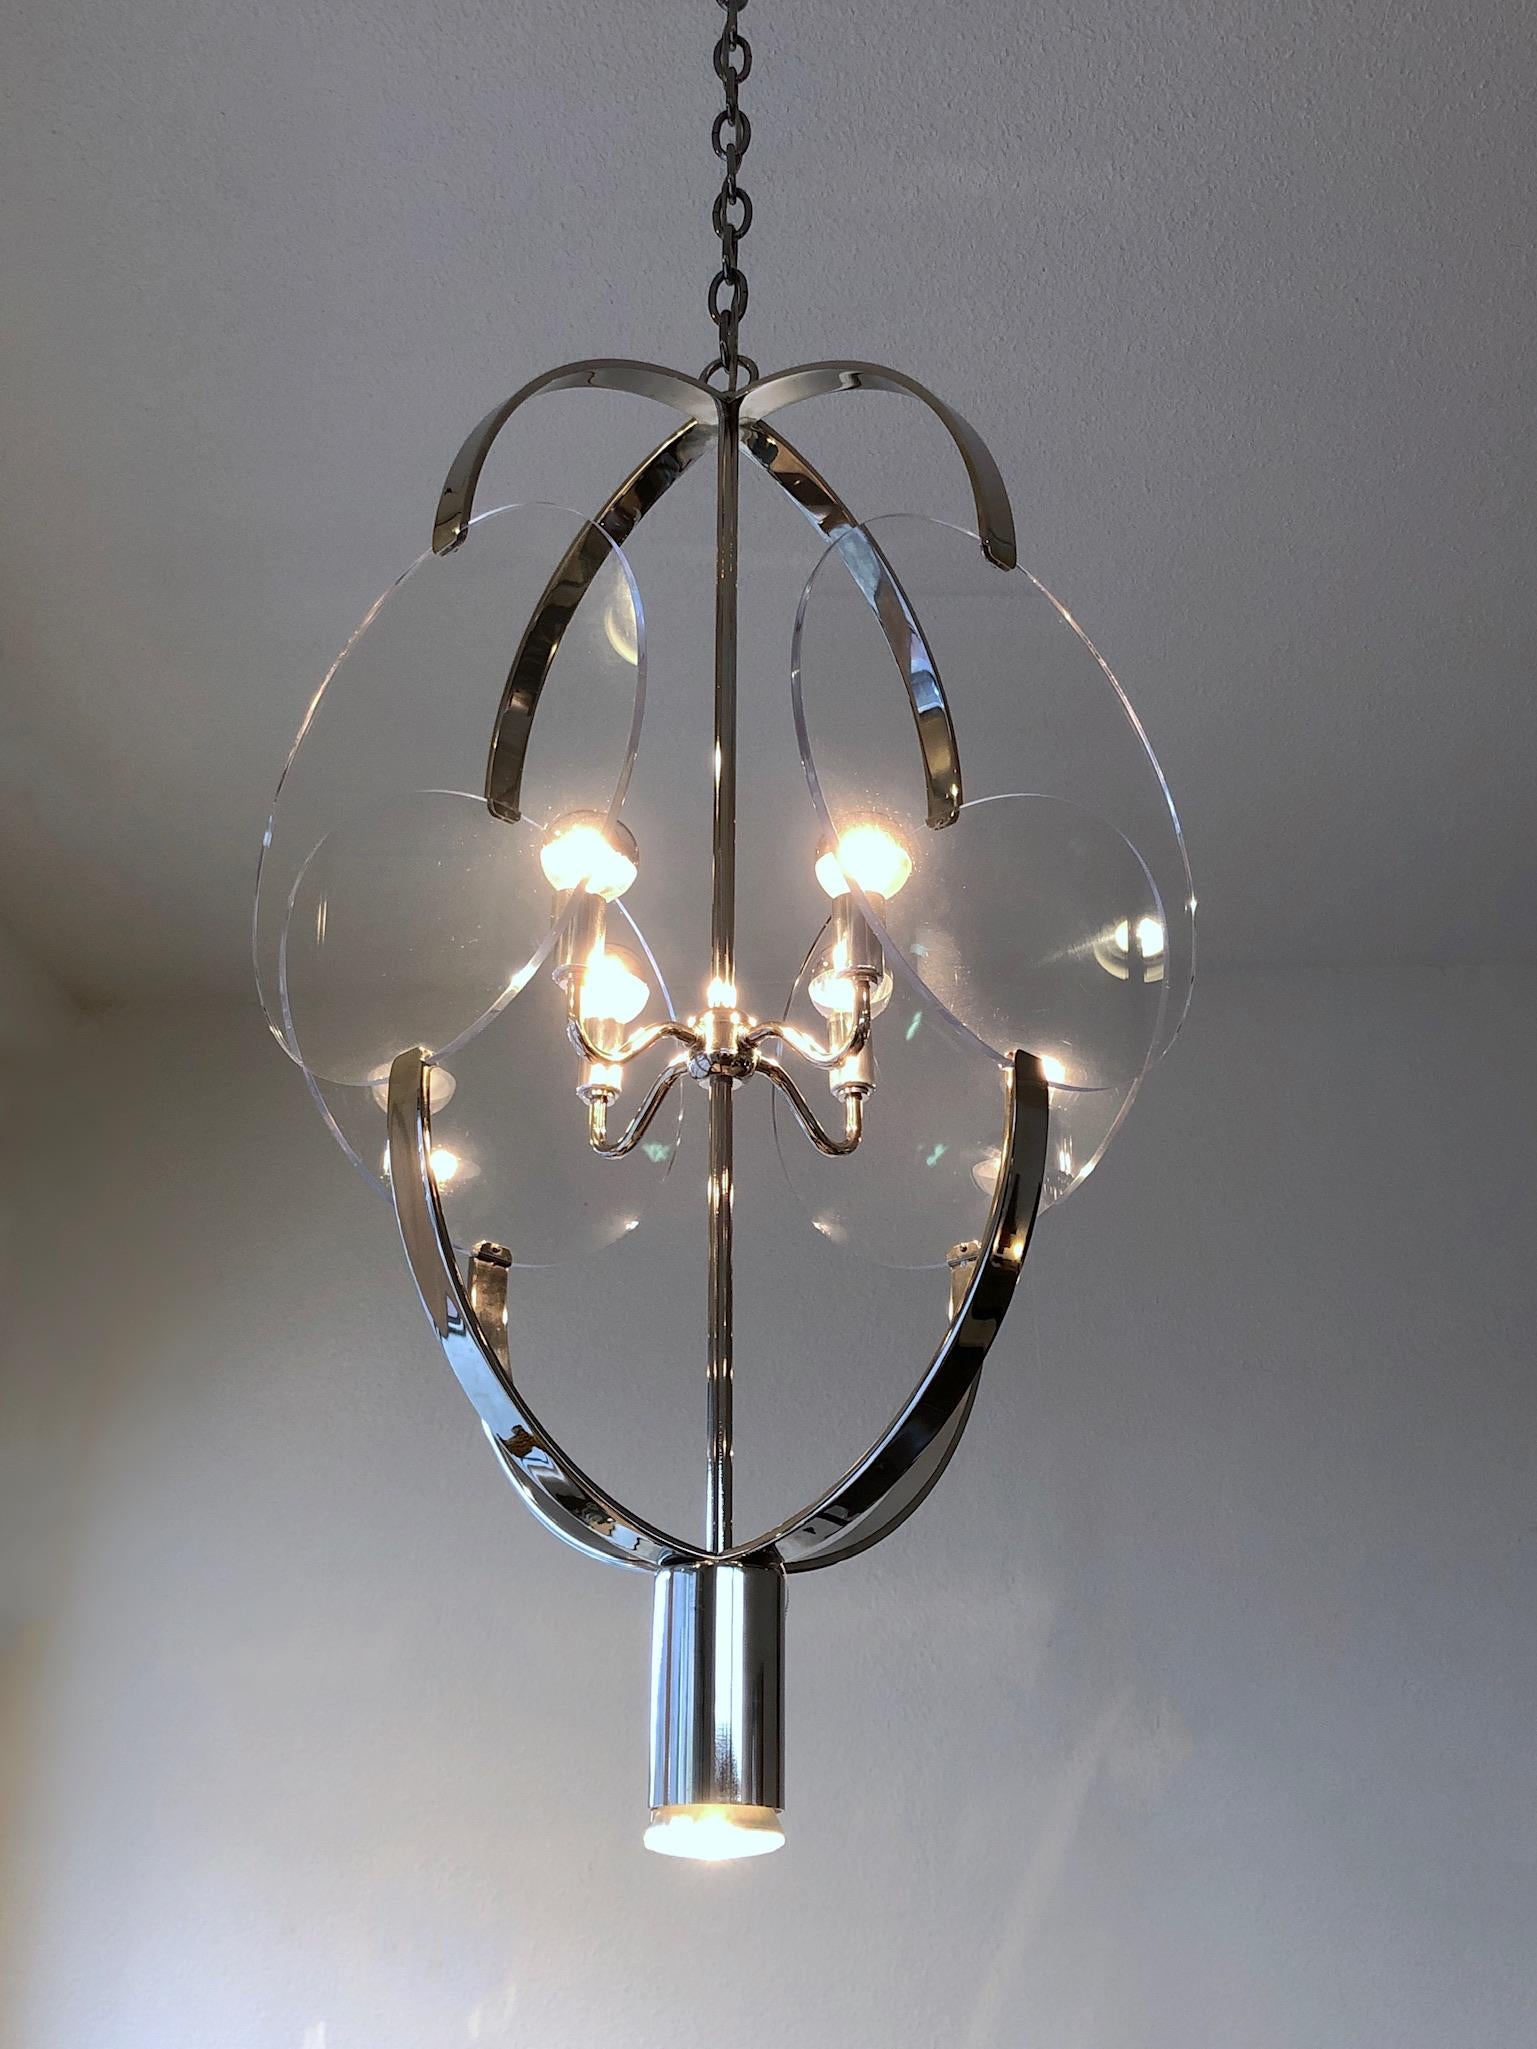 ‘O Hanging Fixture’ chandelier design in the 1970s by Renowned American designer Charles Hollis Jones.
Constructed of polished nickel plated steel and clear Lucite.
The Pendant takes four candelabra lightbulb and one down spotlight.